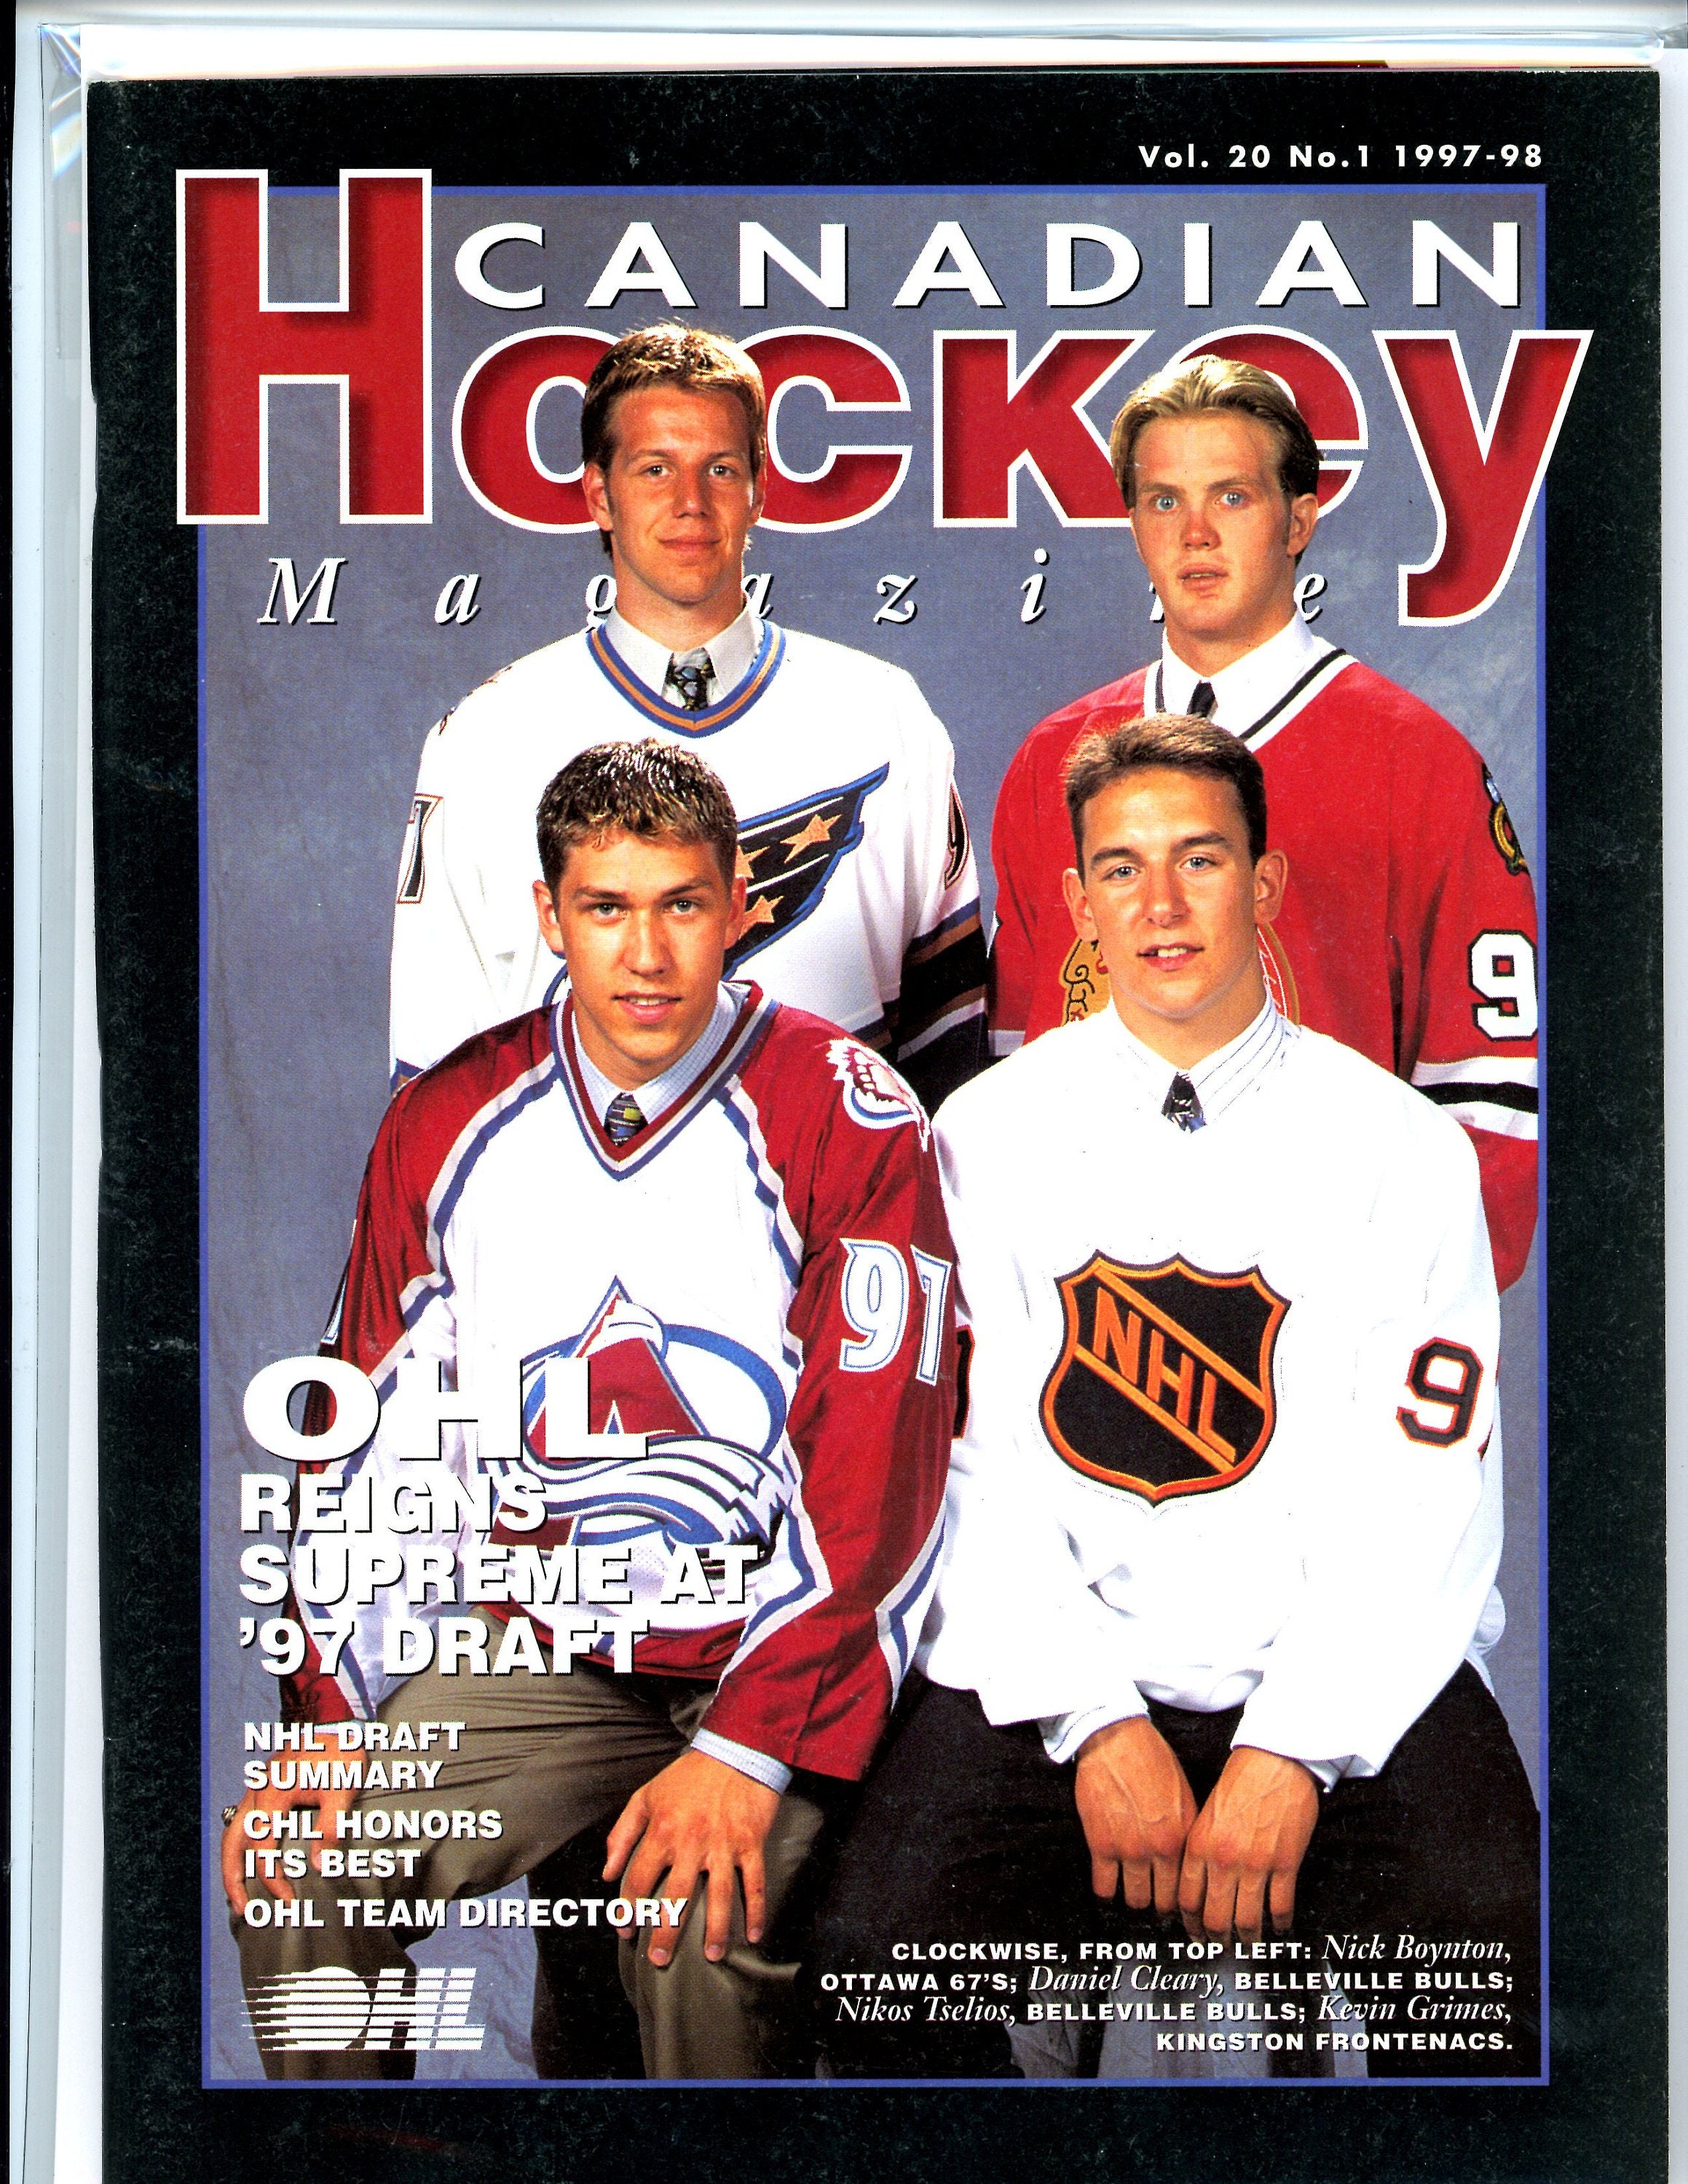 Canadian Hockey Magazine issue 1 1997 OHL Draft Preview and